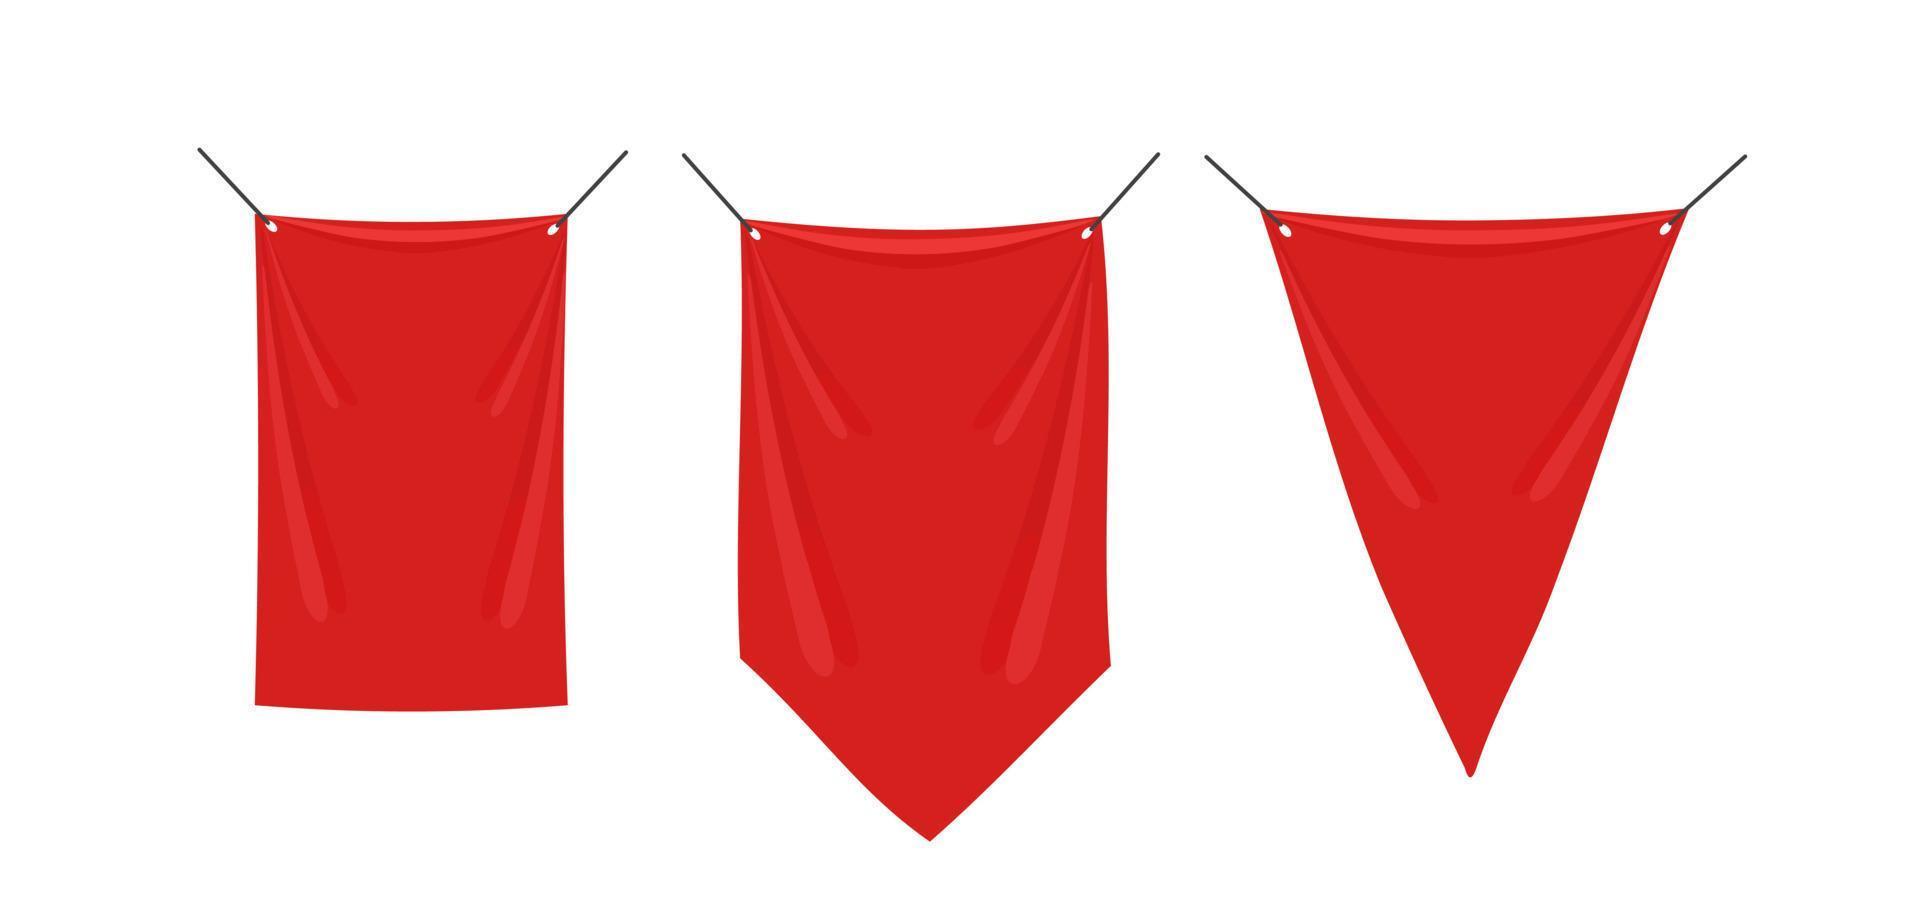 Three red flag banners. Vector illustration isolated on white background